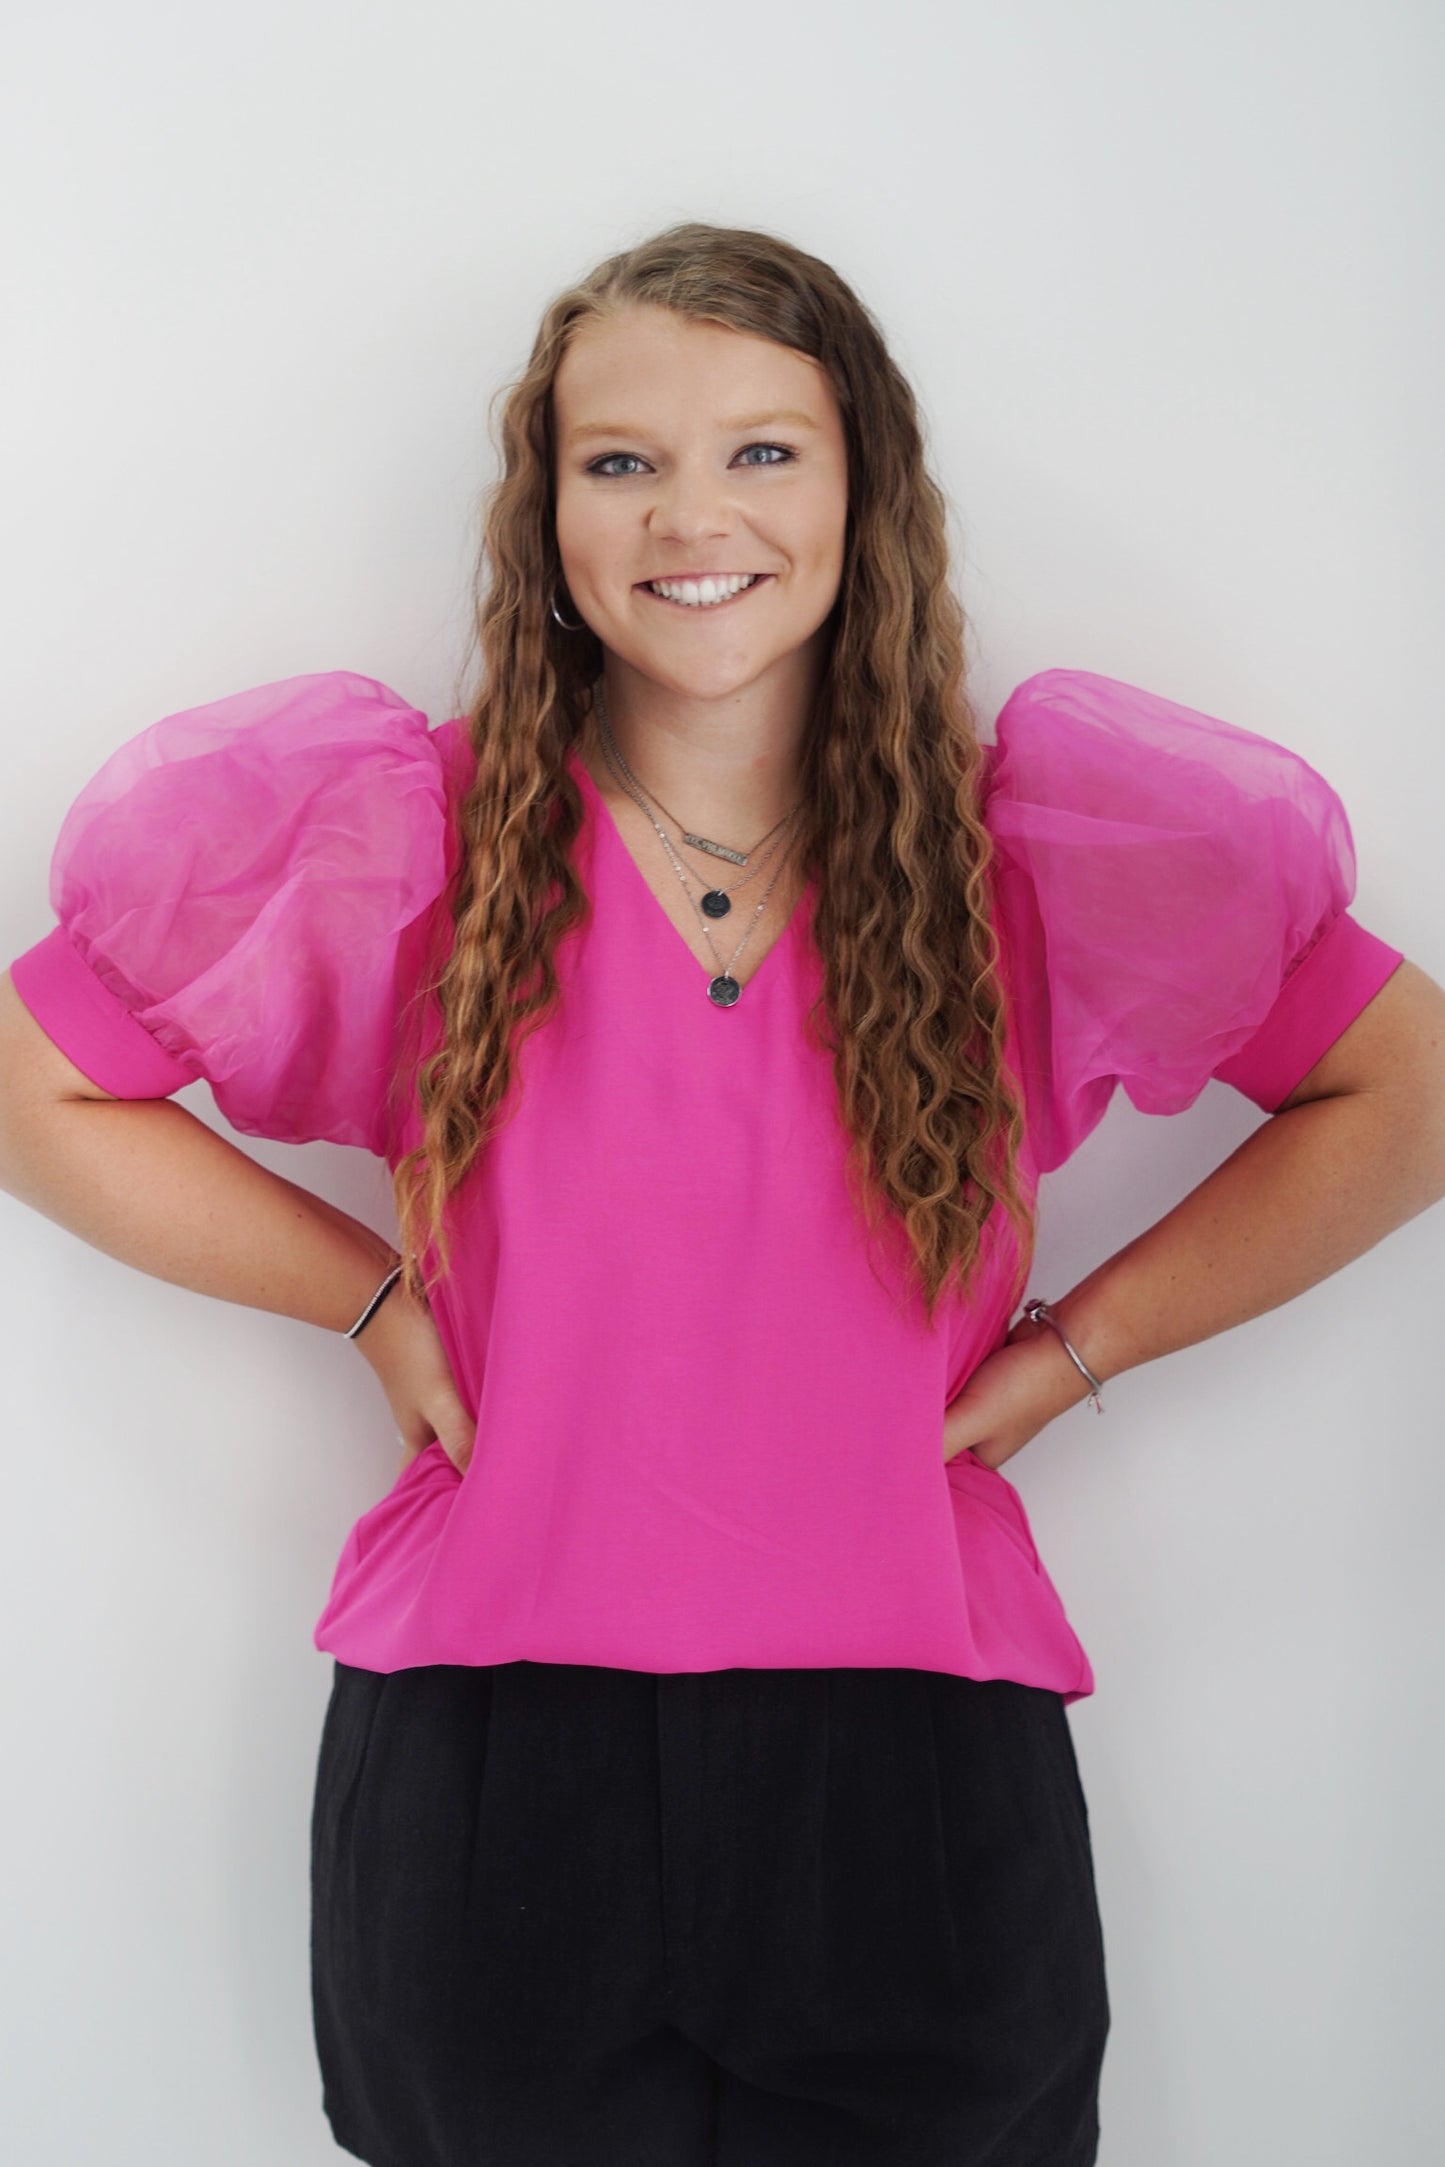 Polly Puffed Sleeve Top V-neck Puffed Sleeve Color: Black and Hot Pink Full Length 100% Polyester Hand Wash Cold, Do Not Wring or Twist, Use Only Non-Chlorine Bleach, Line Dry, Low Iron As Needed, May Be Dry Cleaned Model is wearing a size Small